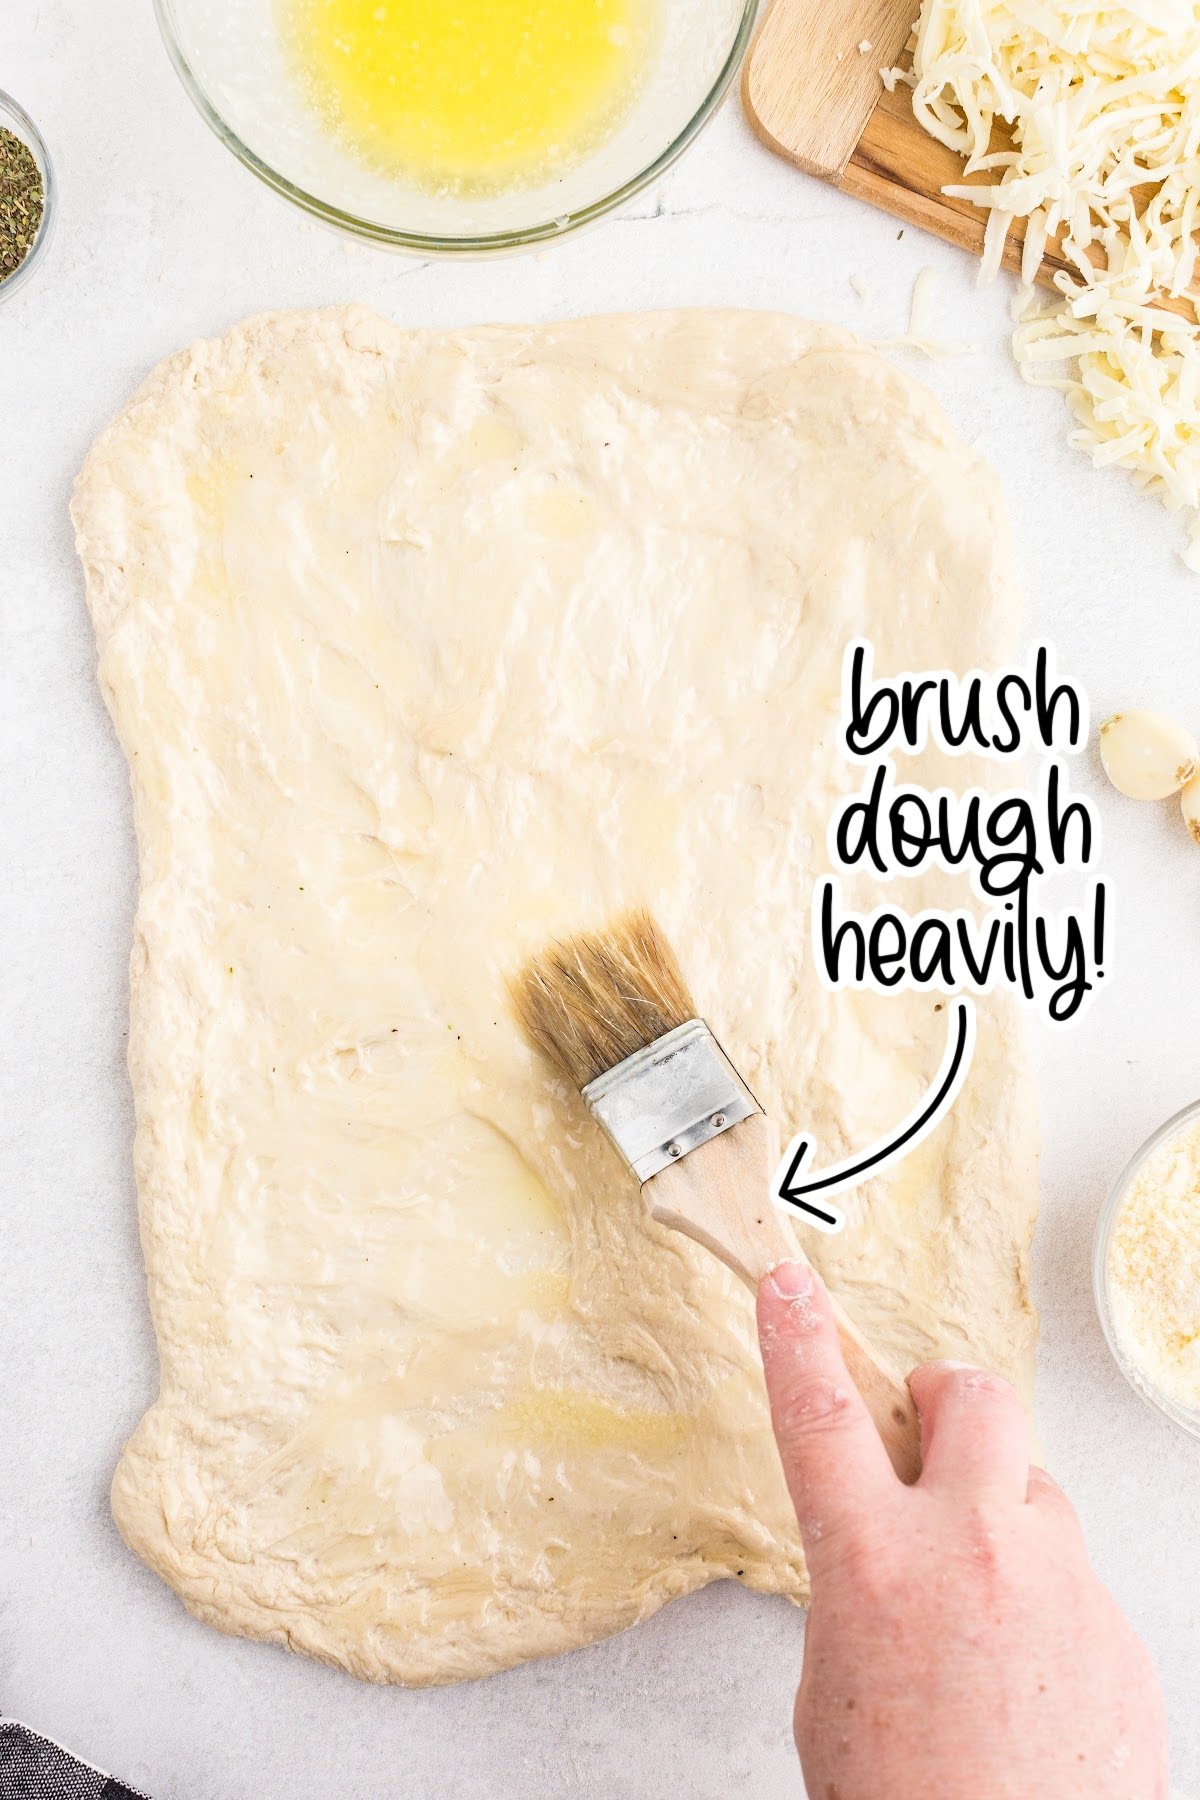 Brushing the dough with butter.